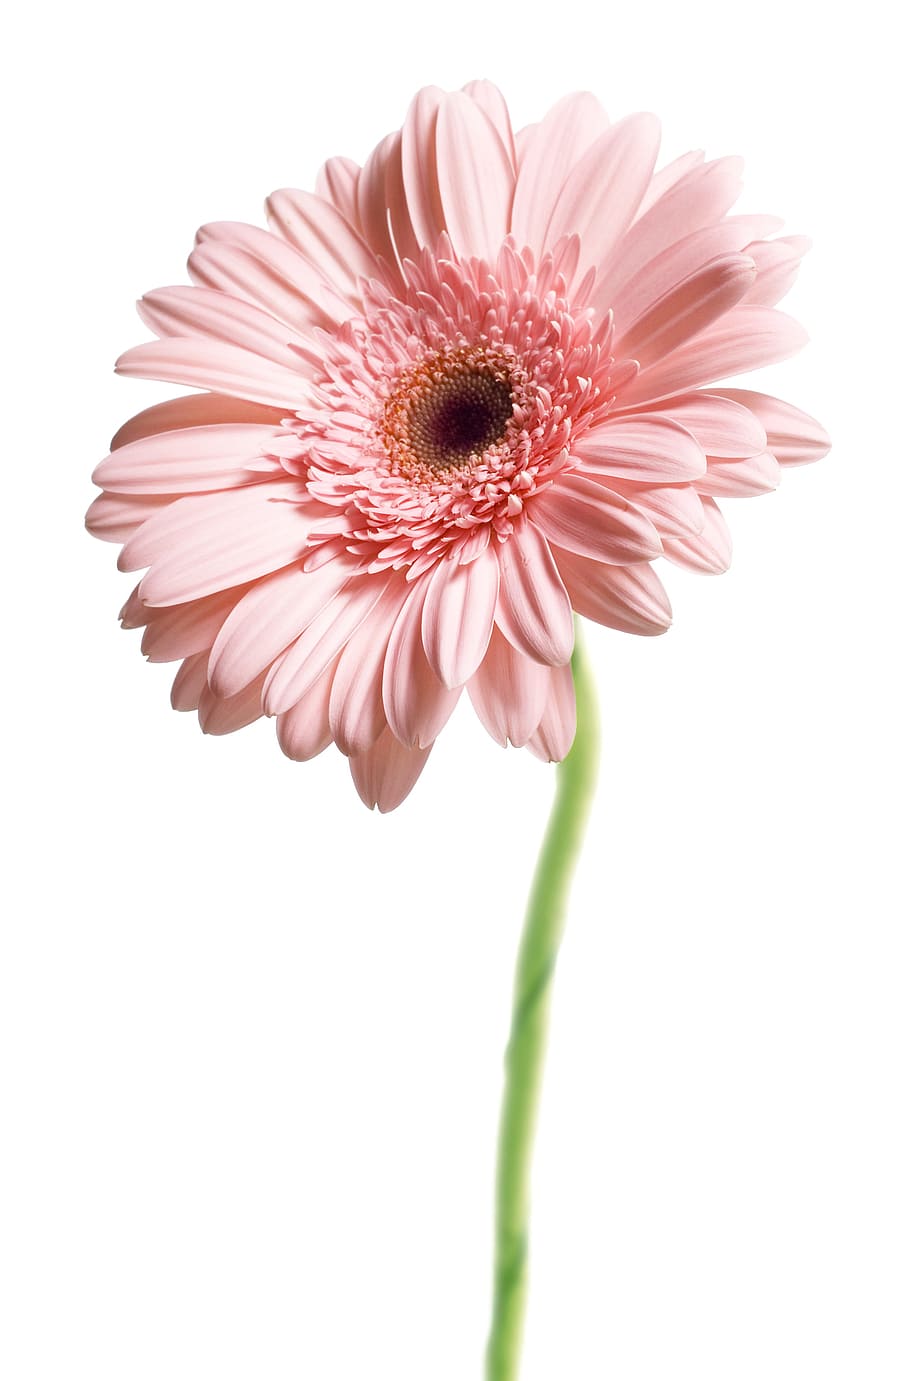 gerbera, flower, background, white, gerber, closeup, isolated, decoration, nobody, natural